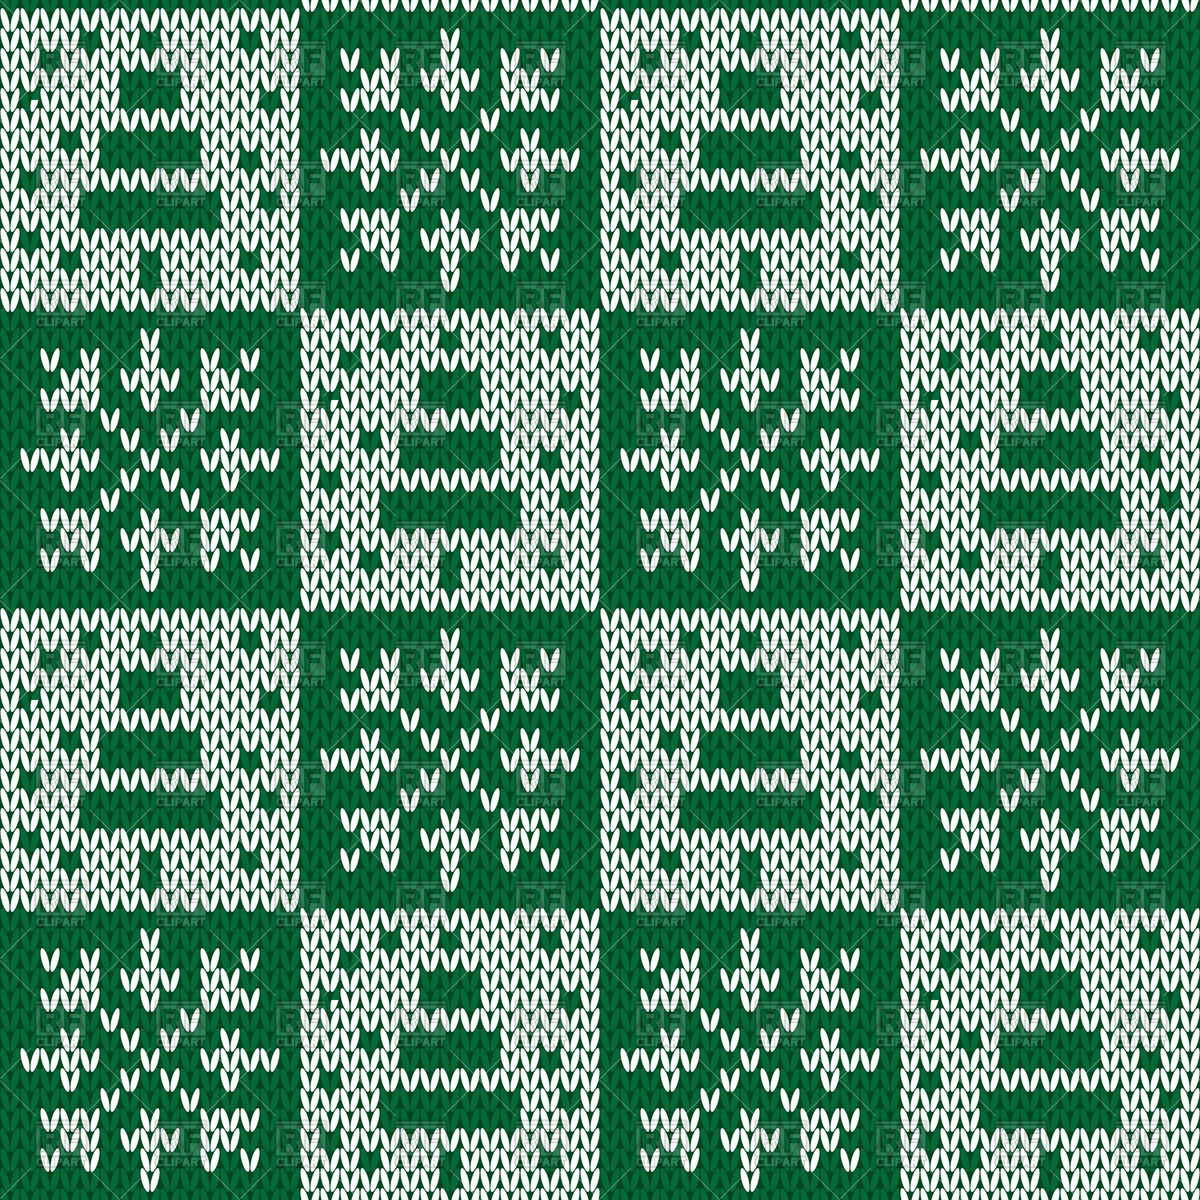 Seamless Knitting Patterns Seamless Knitted Pattern Made Of Snowflakes And Pine Trees Stock Vector Image